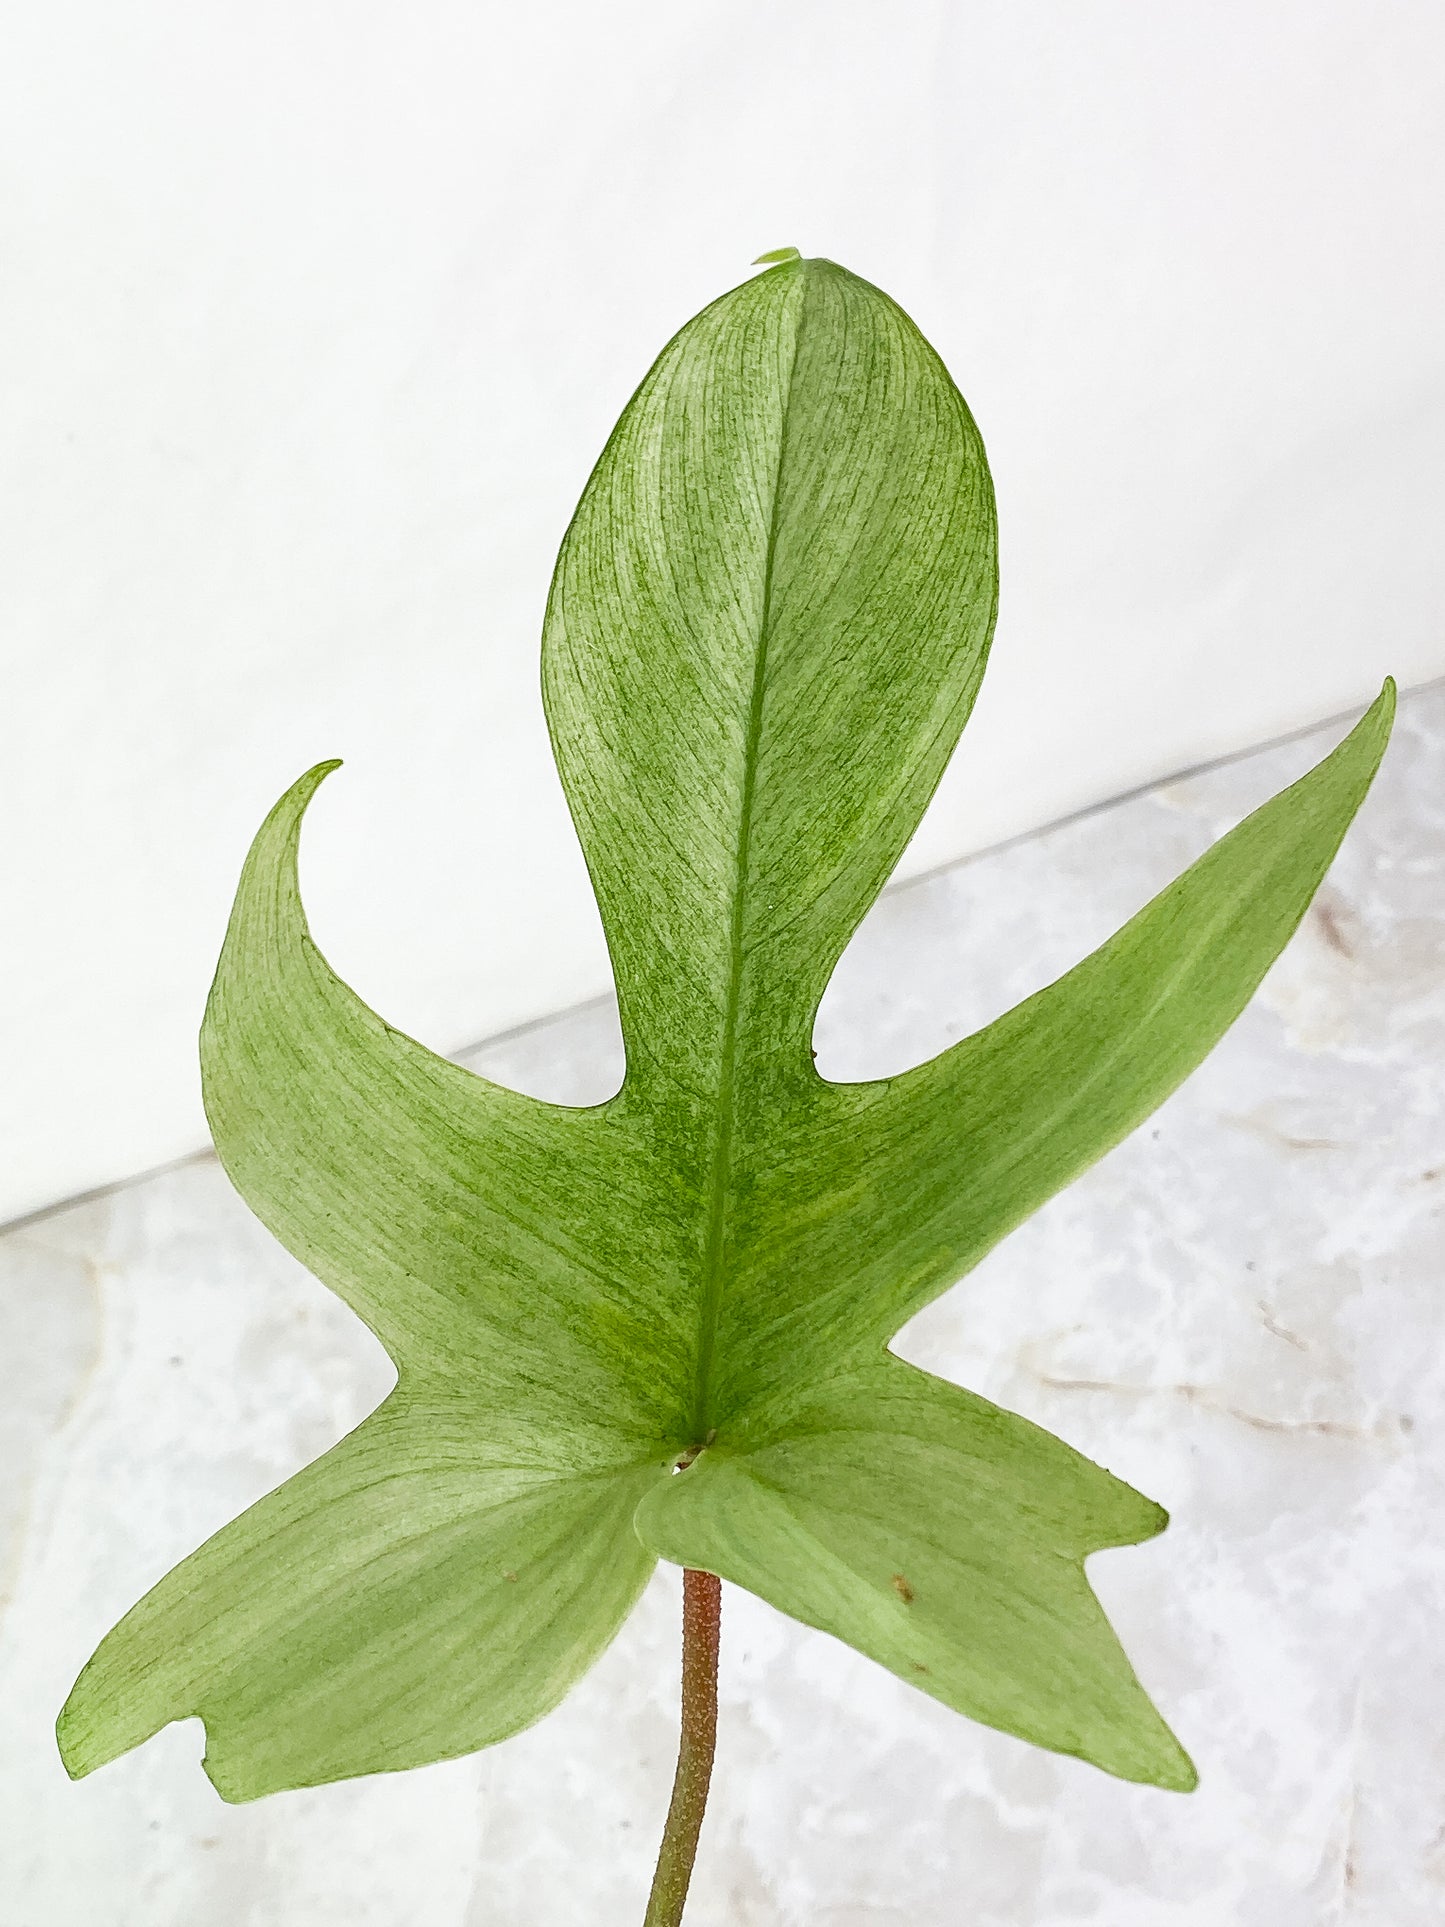 Philodendron florida ghost mint 1 leaf Rooted